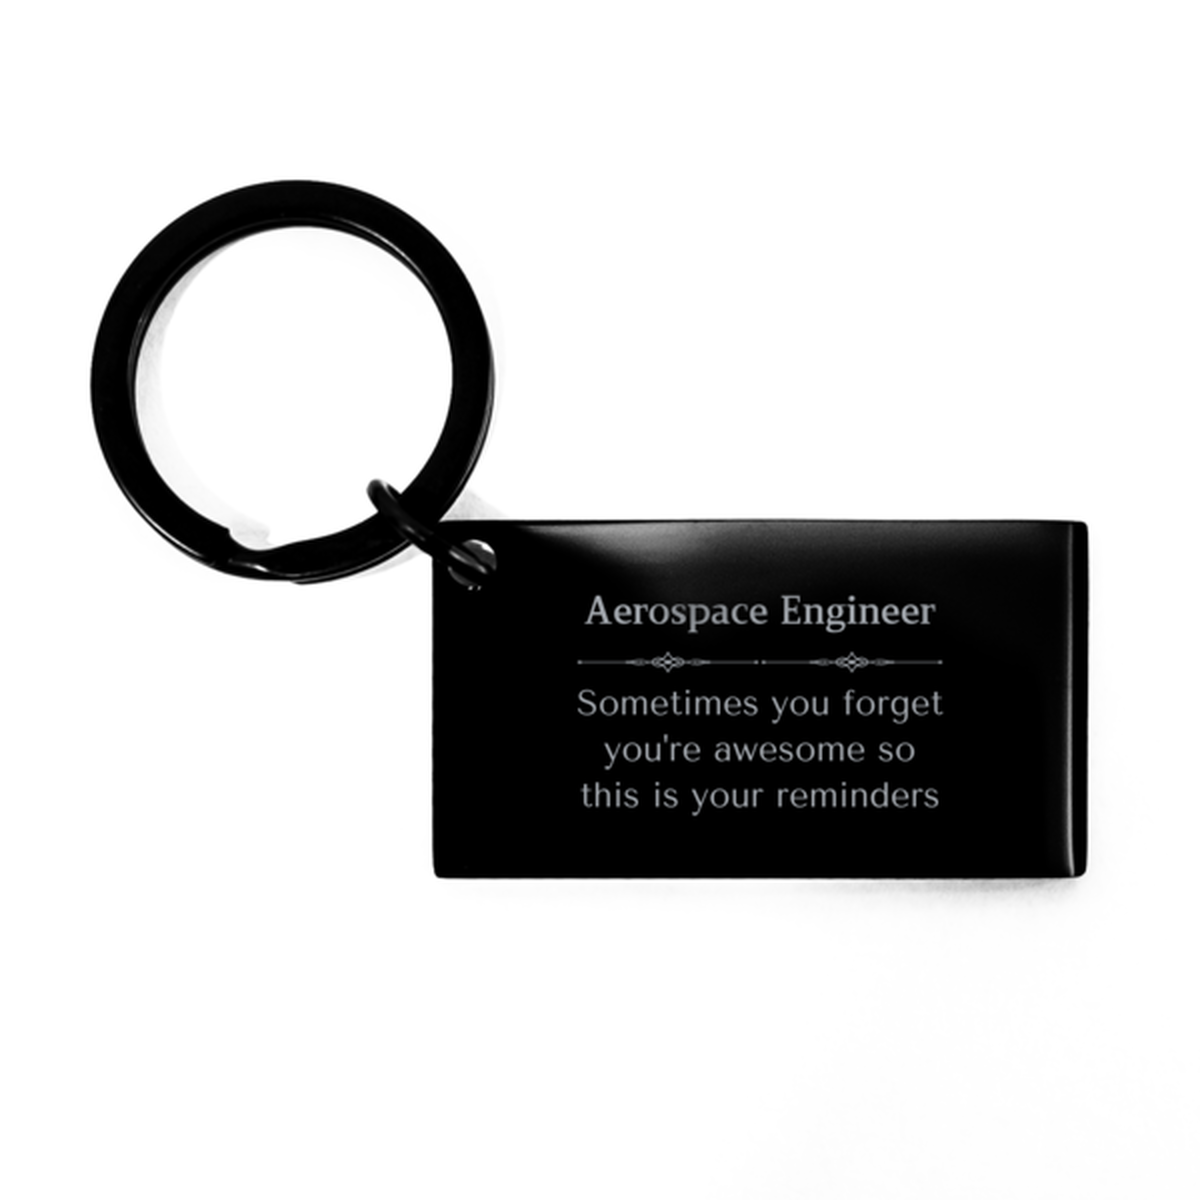 Sentimental Aerospace Engineer Keychain, CFO Sometimes you forget you're awesome so this is your reminders, Graduation Christmas Birthday Gifts for Aerospace Engineer, Men, Women, Coworkers